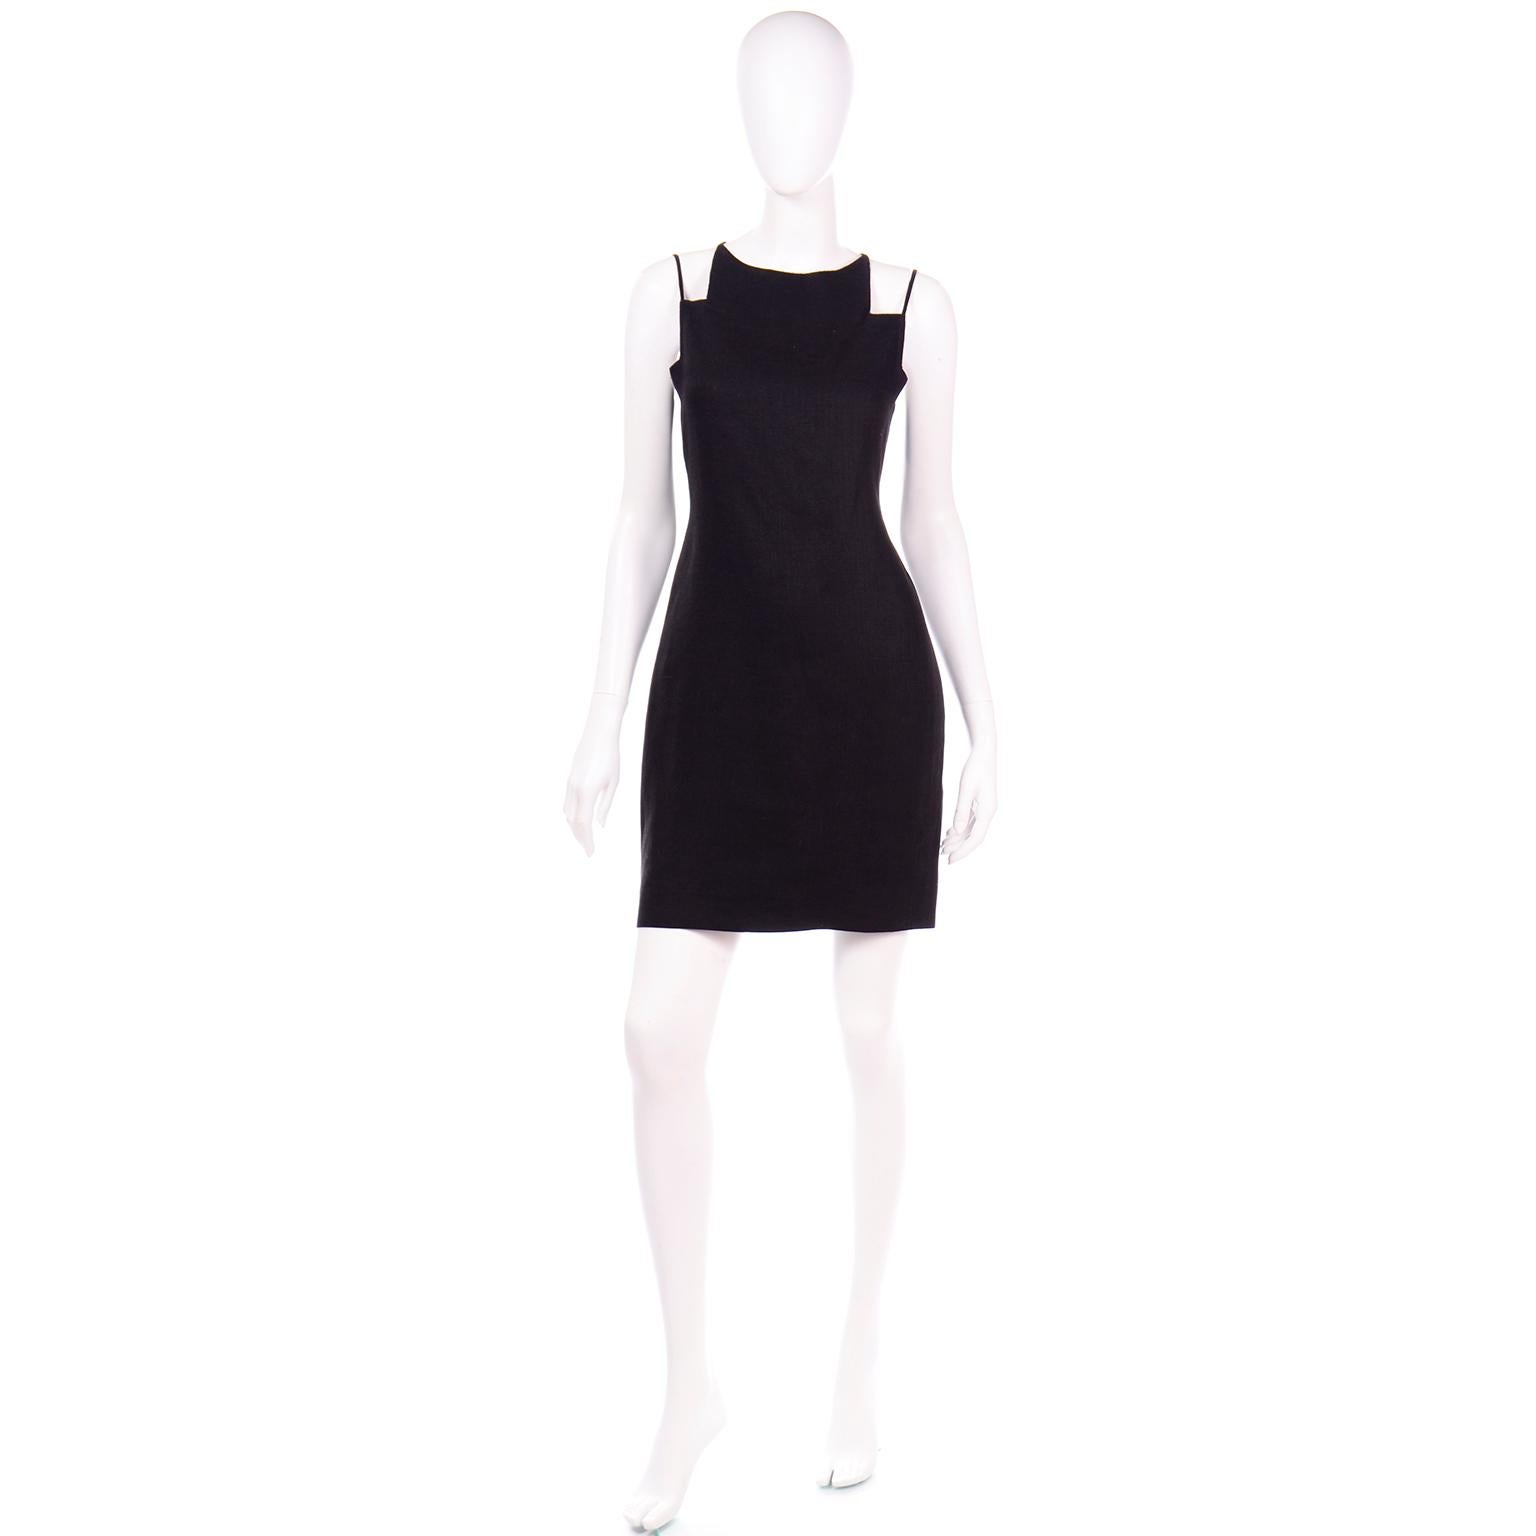 Vintage Bill Blass pieces are truly remarkable and we always grab them whenever we can! This amazing Bill Blass vintage black linen evening mini dress has a dramatic cutout design at the neck and shoulders that makes it so unique! We also love the